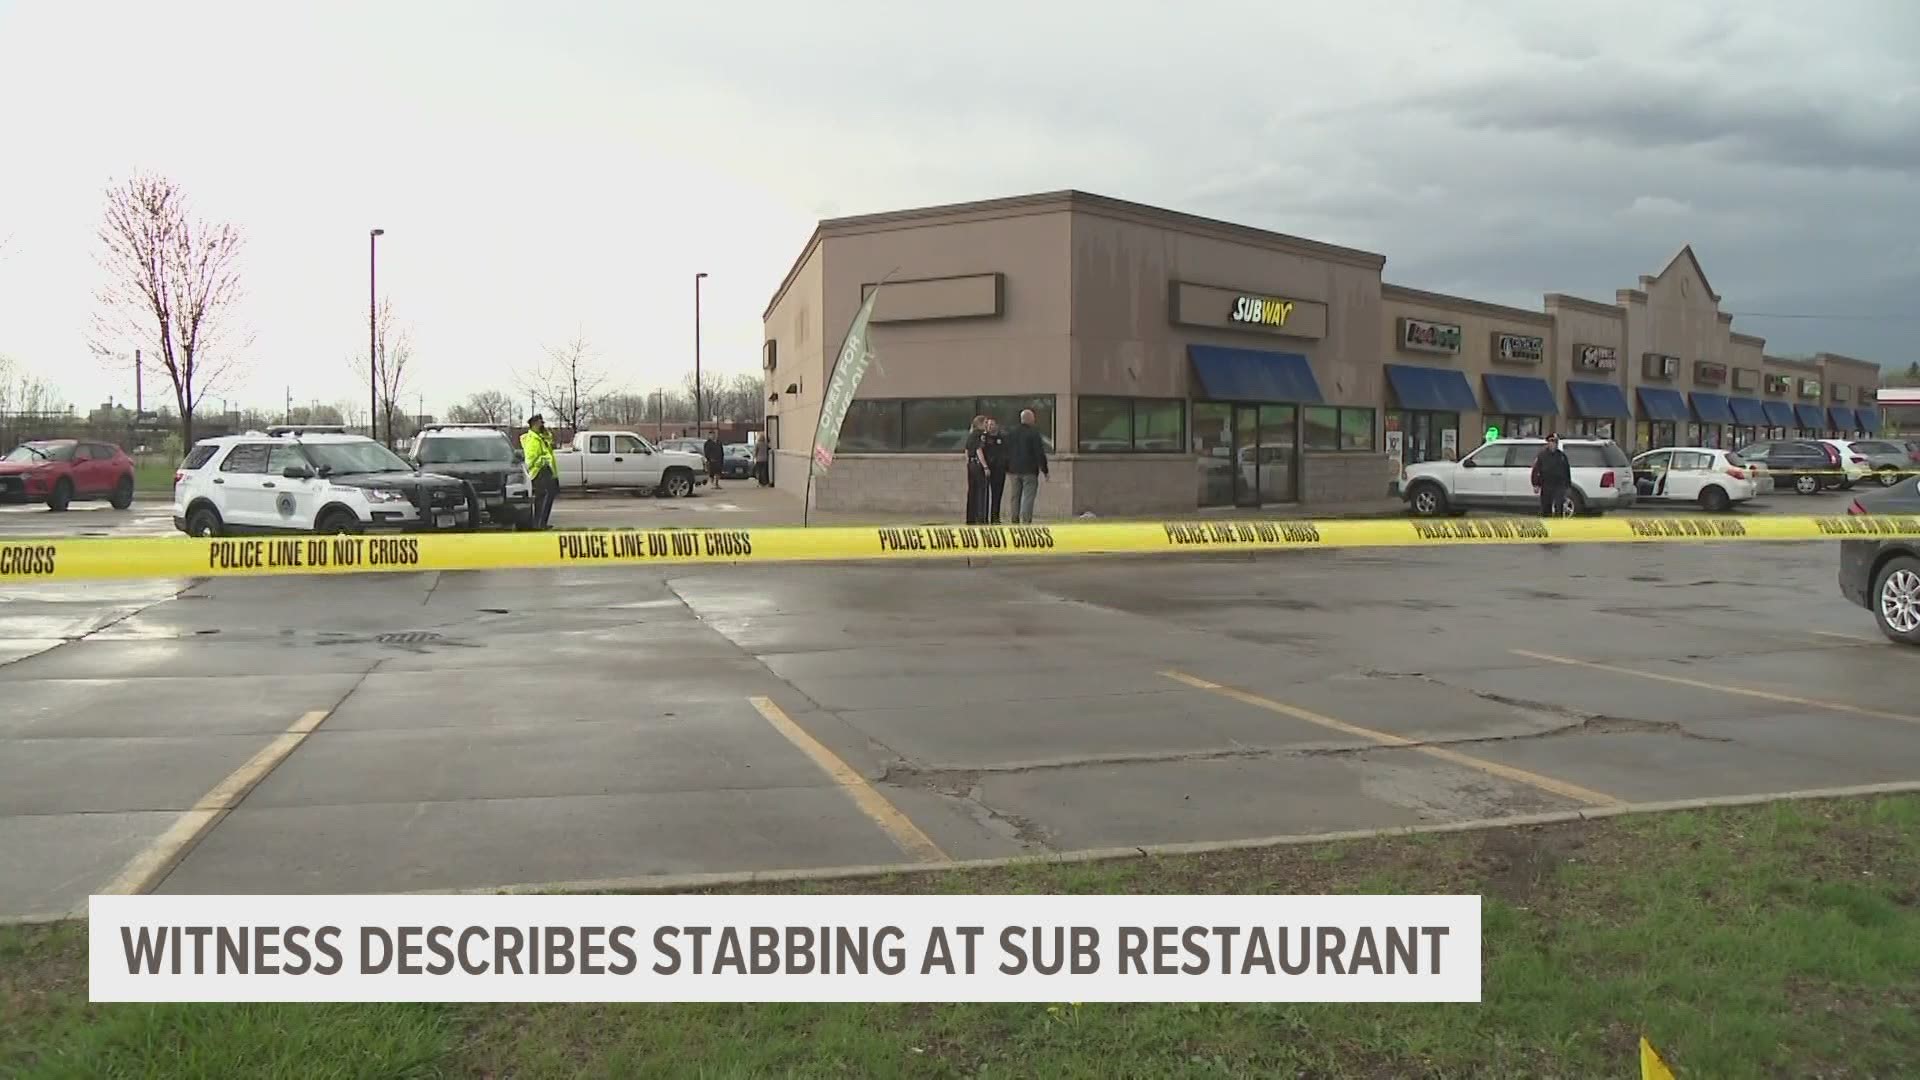 Wesley Armstrong and his aunt were two of the people who were able to administer aid to the victim in Wednesday's stabbing, at the Subway restaurant.